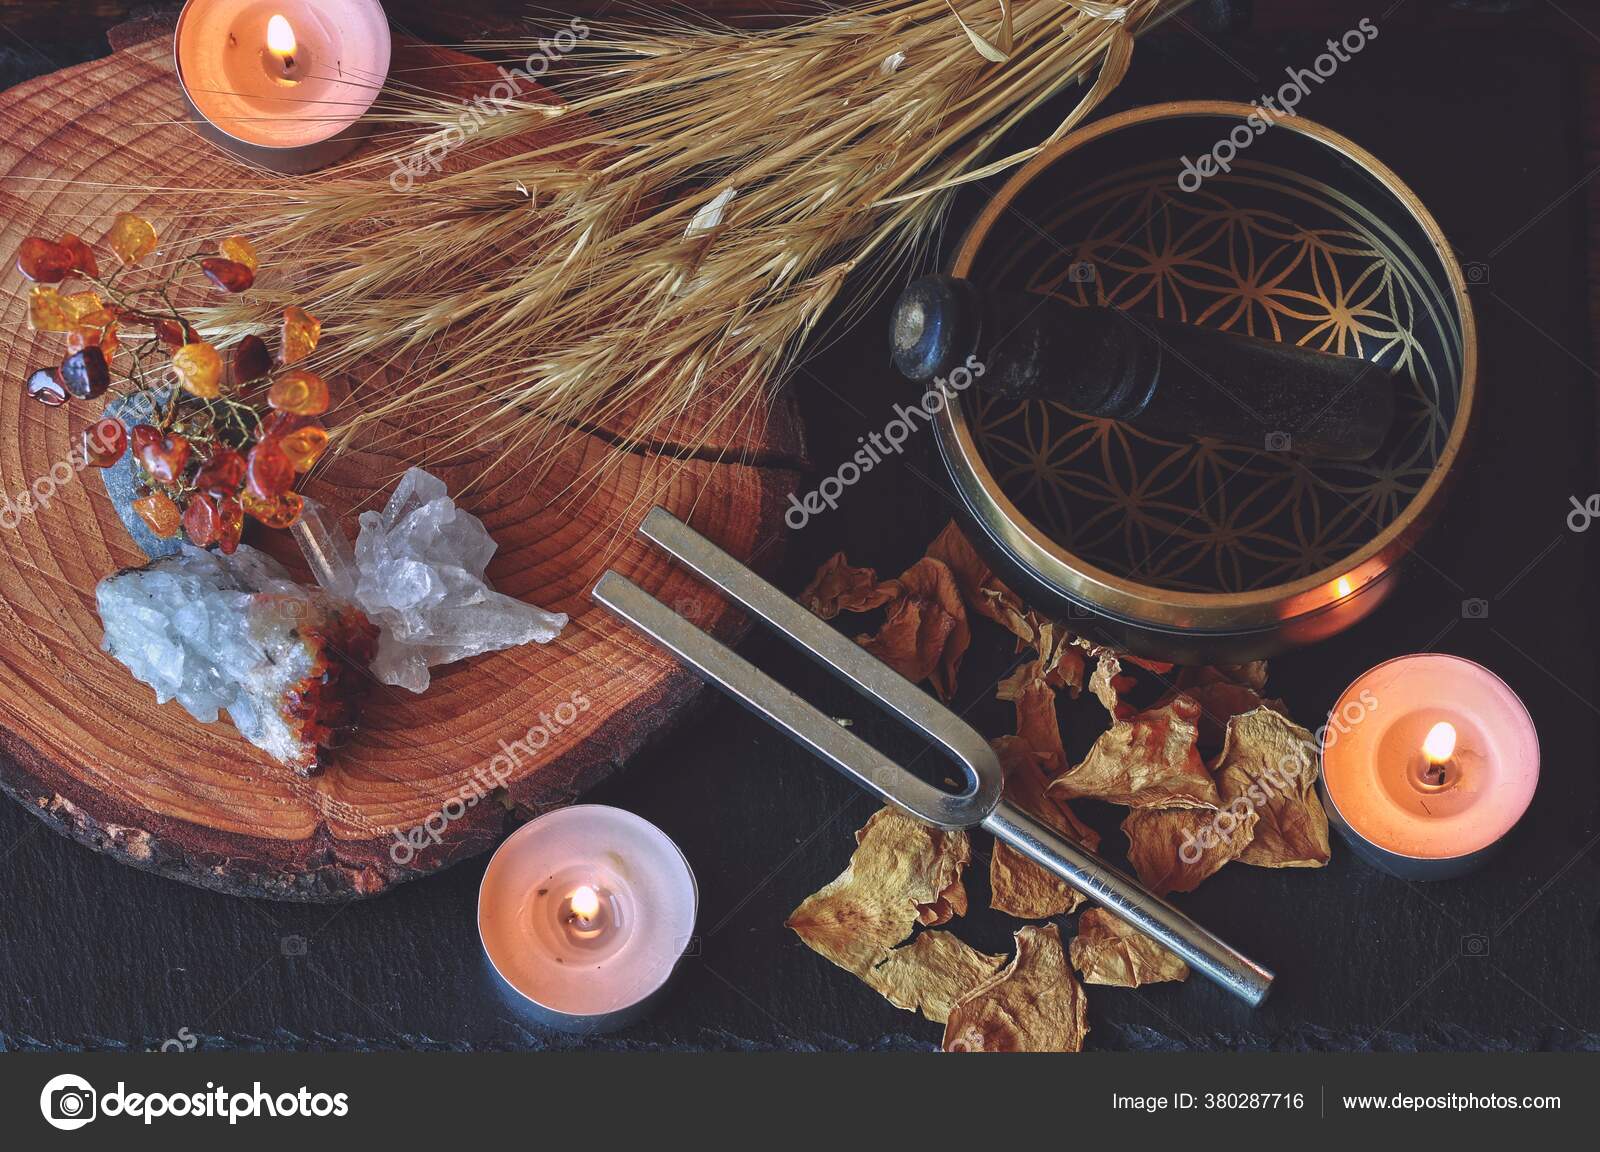 Altar　©Rustic　Witch　Wiccan　Tuning　380287716　Sound　Witch　Magick　Photo　Prepared　Fork　Stock　Healing　741Hz　by